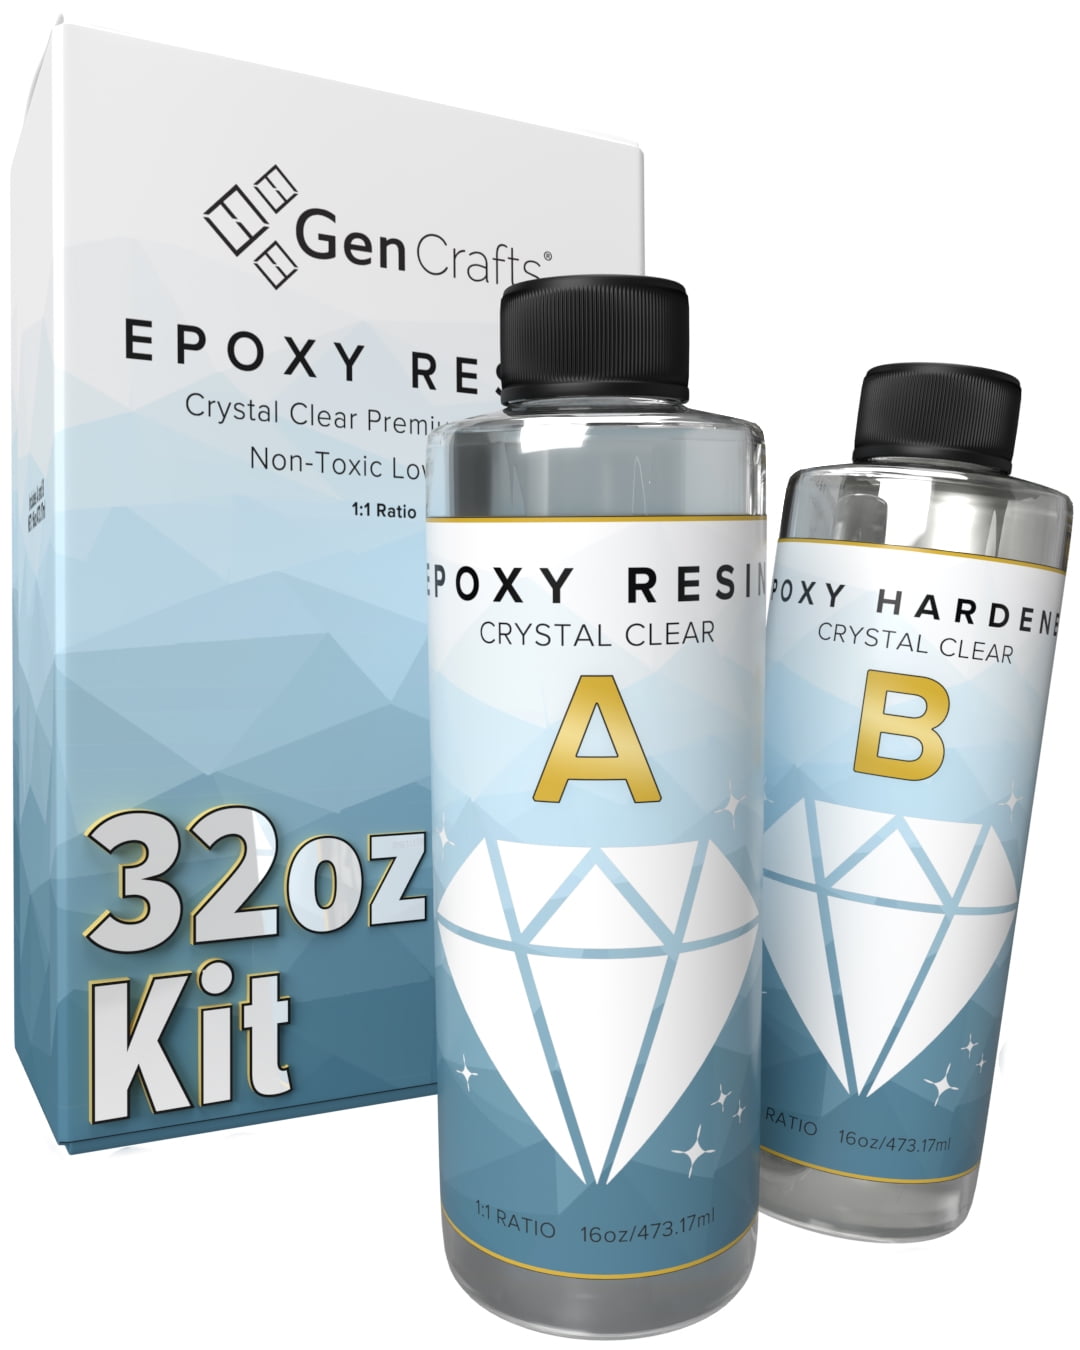 Epoxy Resin Crystal Clear Resin Kit Art Boat and Tabletop | 2 Part Countertop Ma